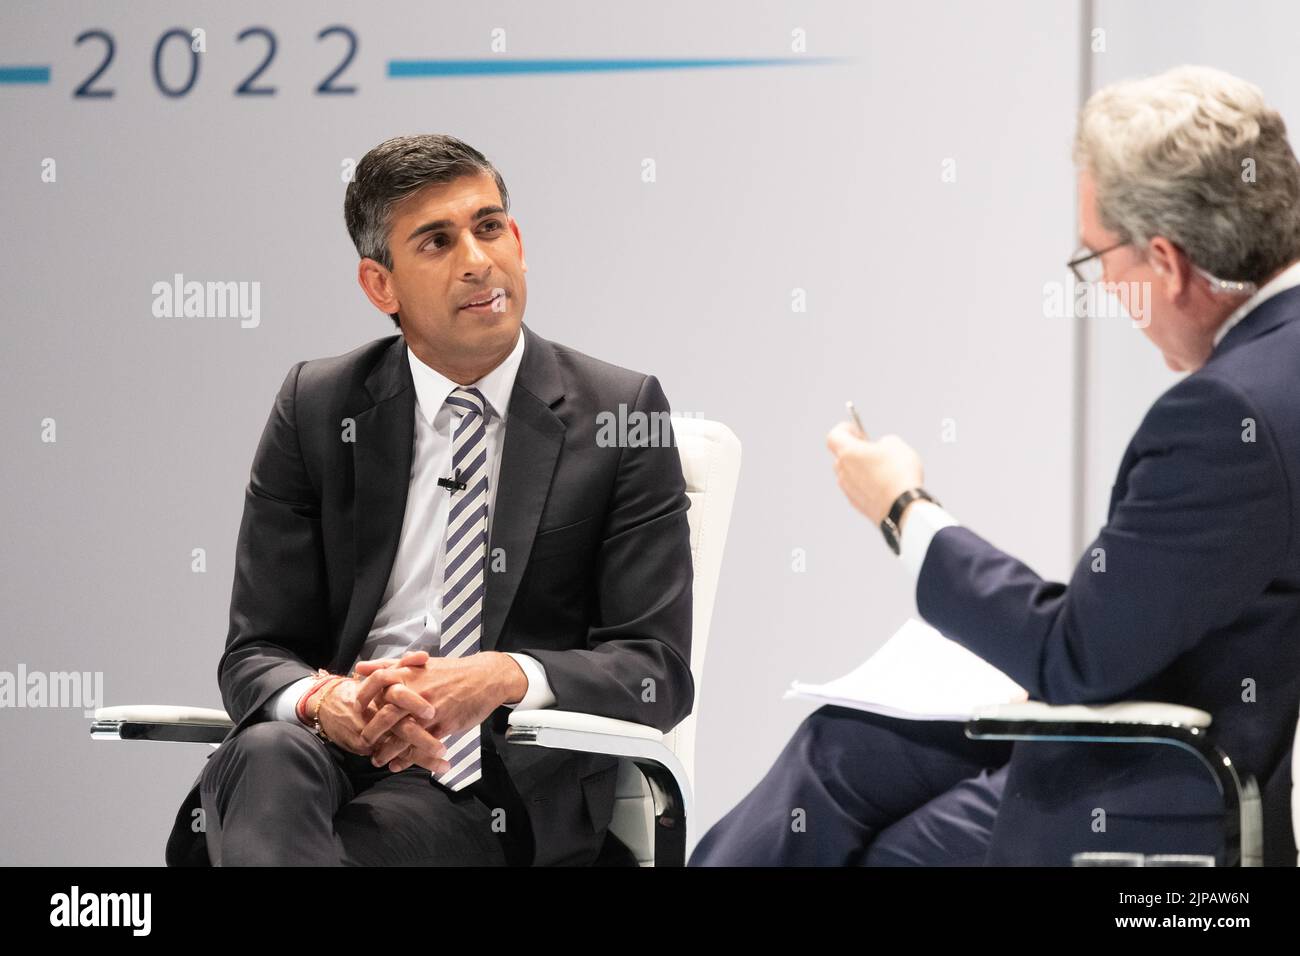 Perth Concert Hall, Perth, Scotland, UK. 16th Aug, 2022. Rishi Sunak, former UK Chancellor of the Exchequer speaking during the seventh Conservative leadership election hustings at Perth Concert Hall, the only time the debate is being hosted in Scotland. The husting is being hosted by Colin Mackay Credit: Kay Roxby/Alamy Live News Stock Photo